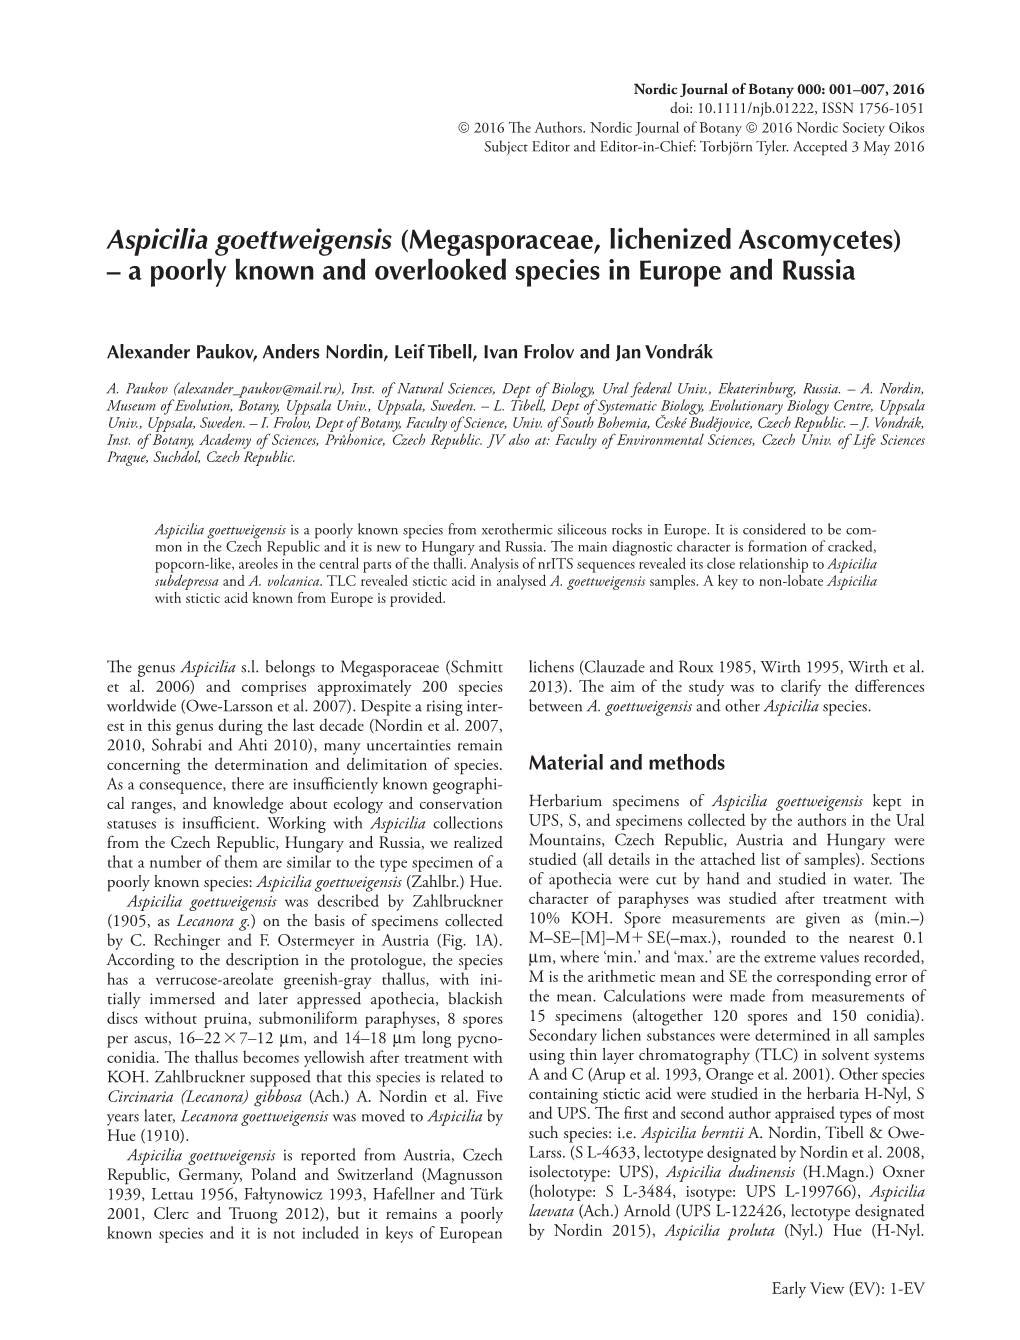 Aspicilia Goettweigensis (Megasporaceae, Lichenized Ascomycetes) – a Poorly Known and Overlooked Species in Europe and Russia